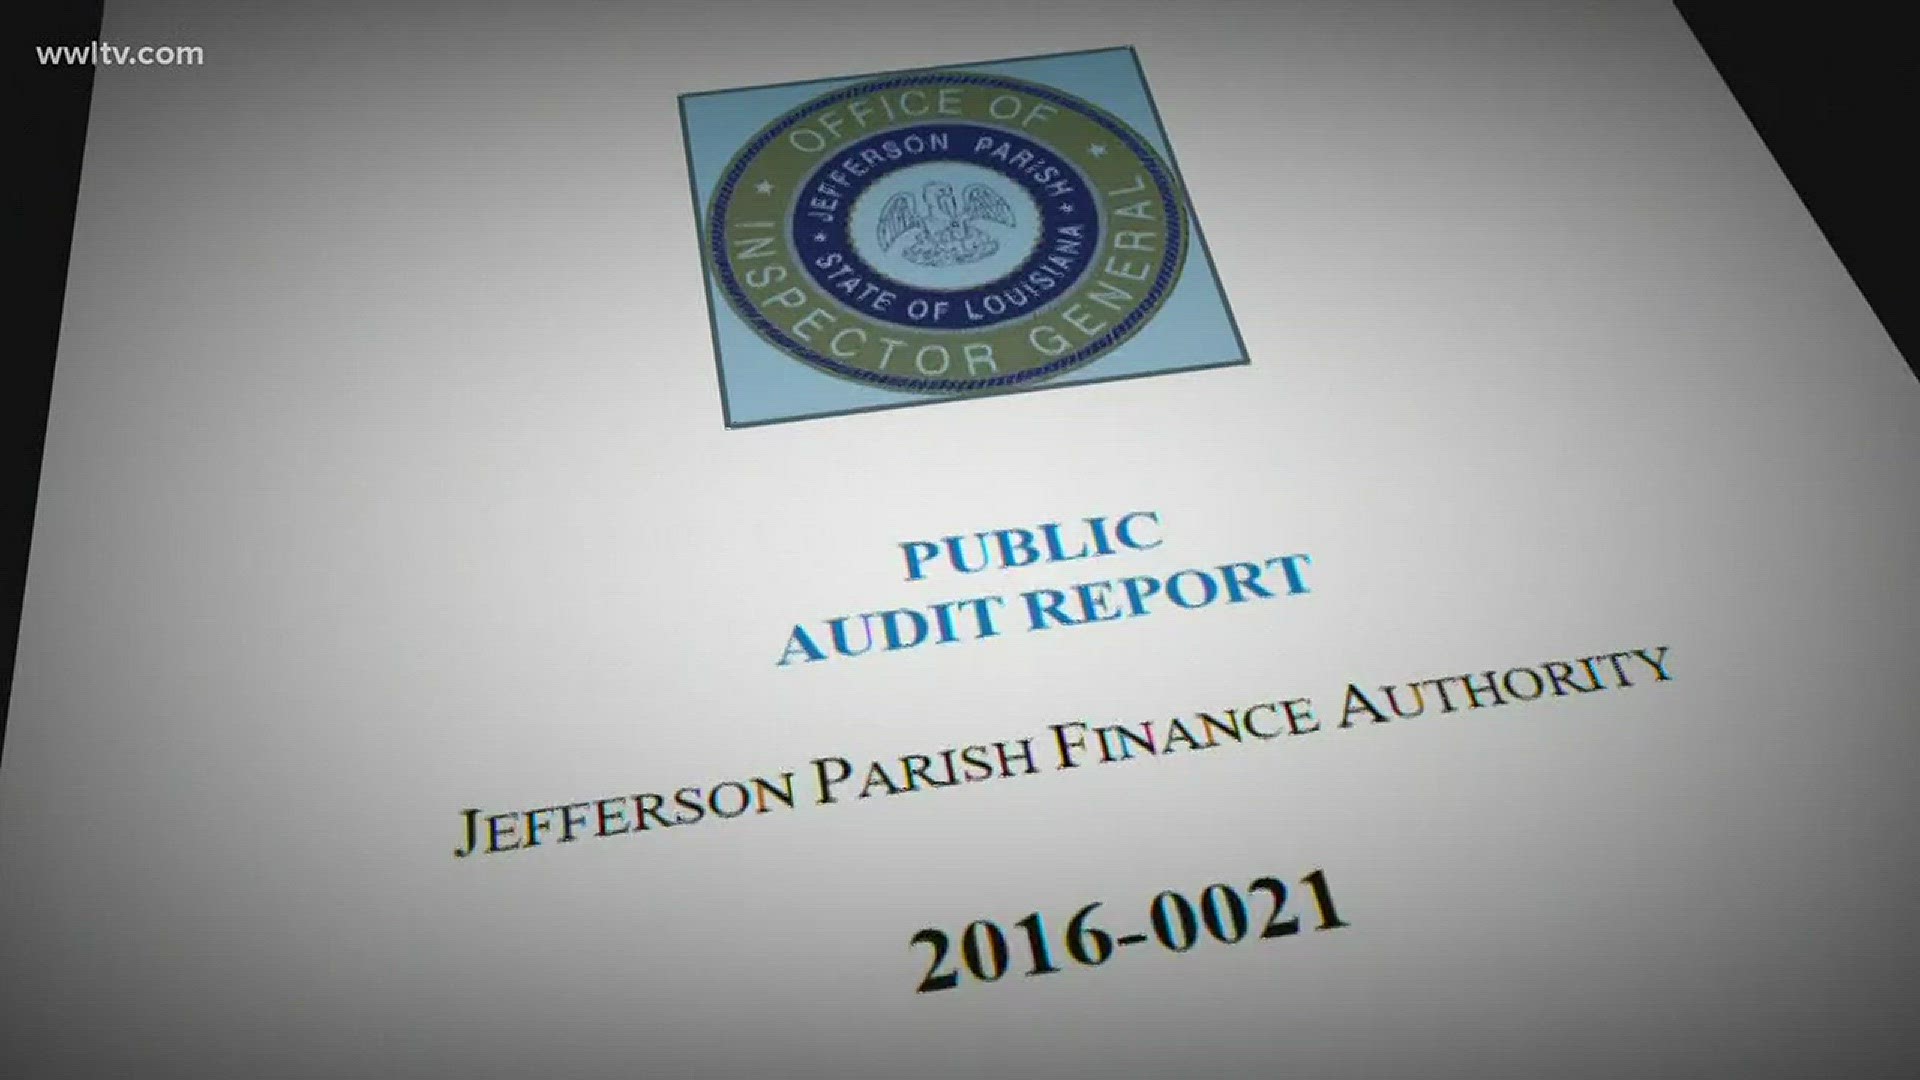 The JPFA has been the subject of a series of investigative reports by WWL-TV, with many of the findings of that investigation substantiated by the IG's audit.